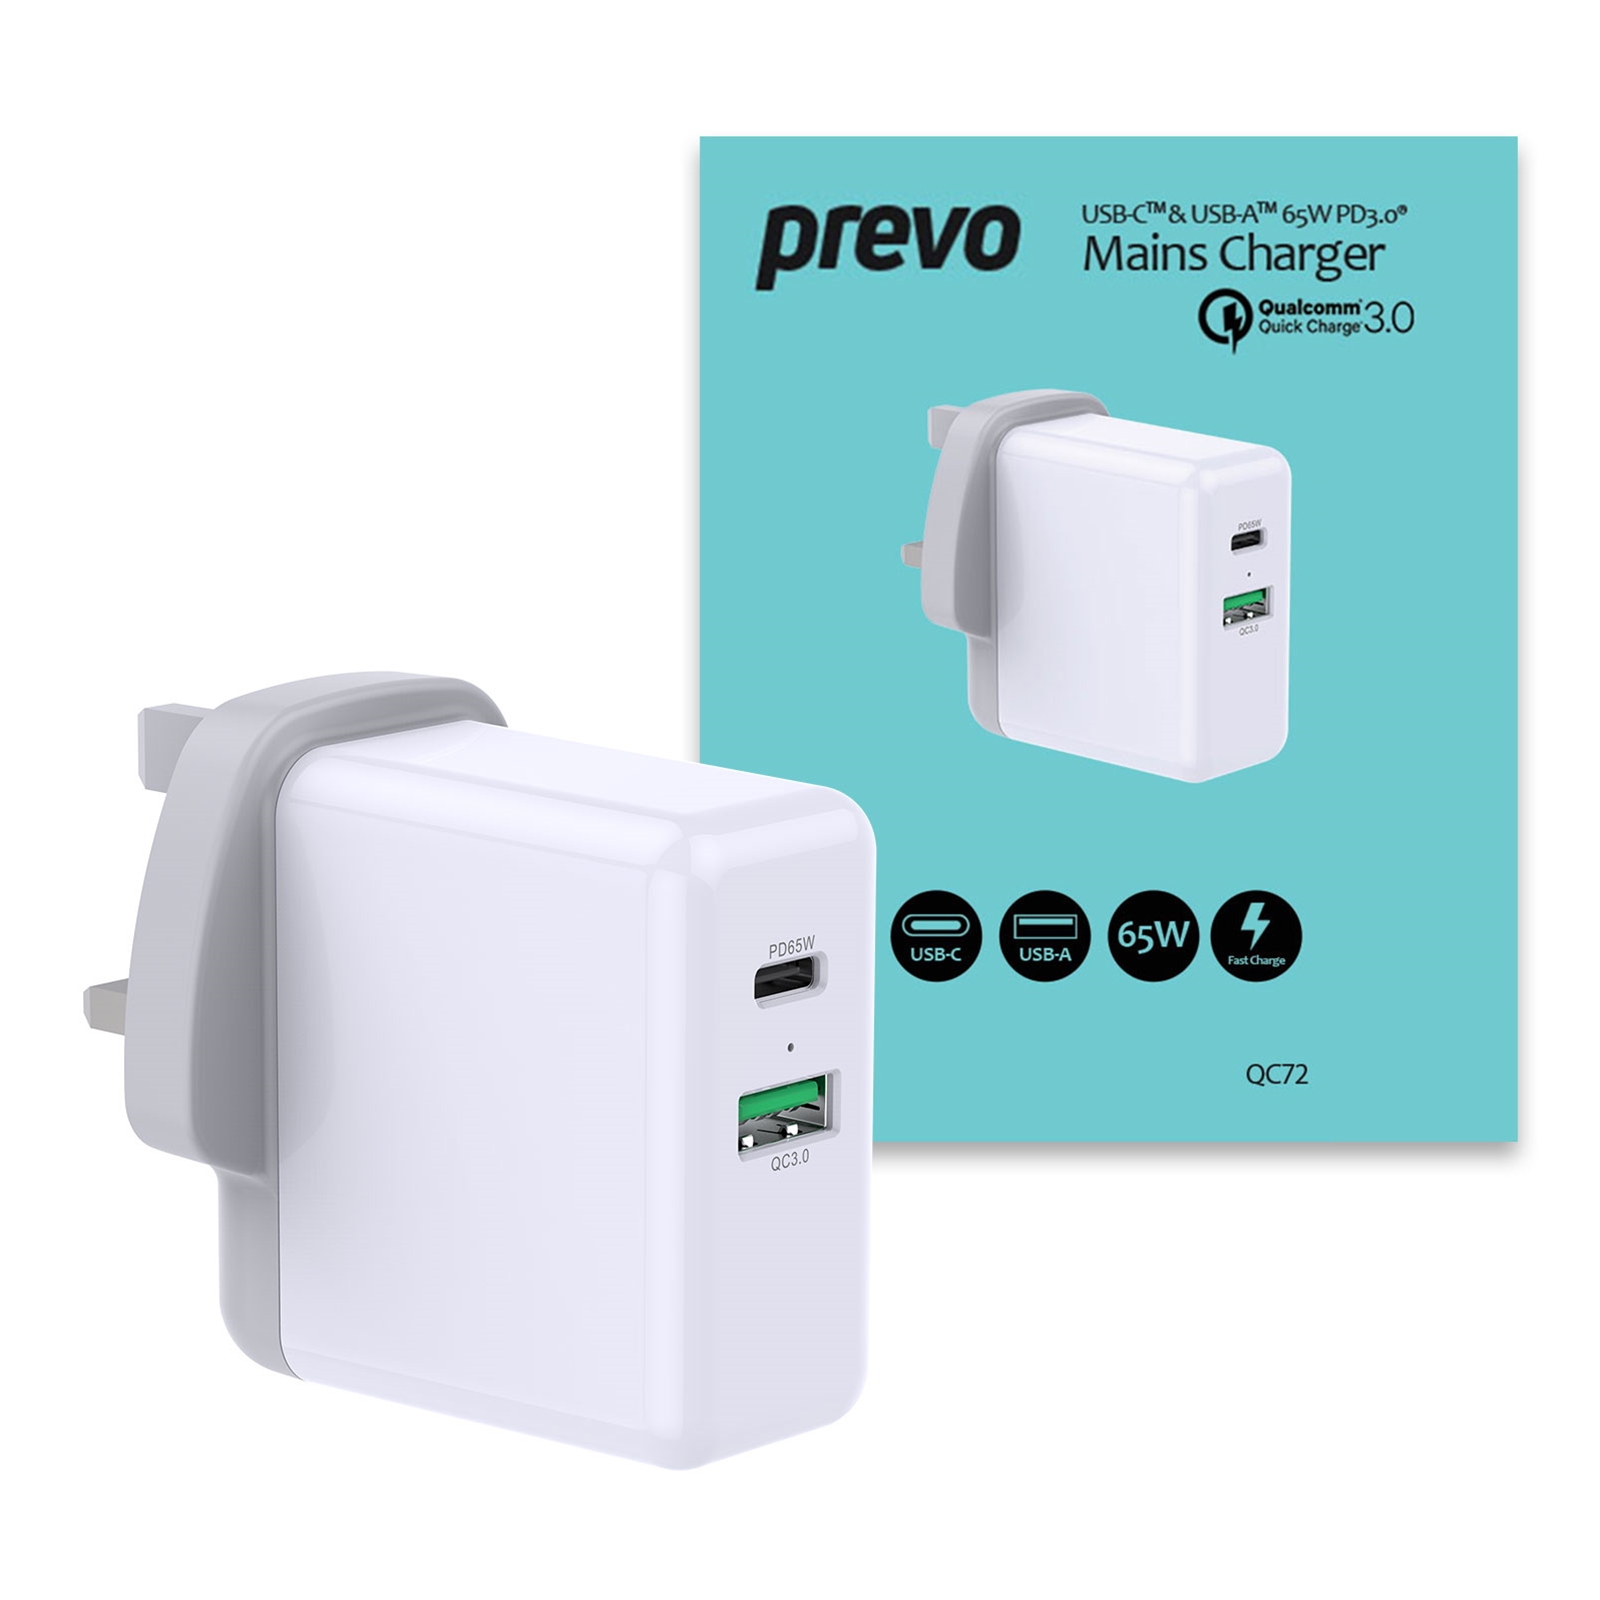 Prevo QC72 USB Type-C & USB Type-A Fast Charge Mains Charger with Qualcomm Quick Charge 3.0 for Laptops, Ultrabooks, Chromebooks, iPads, MacBooks, Smartphones, Tablets, Mobile Devices, Action Cameras, DSLRs